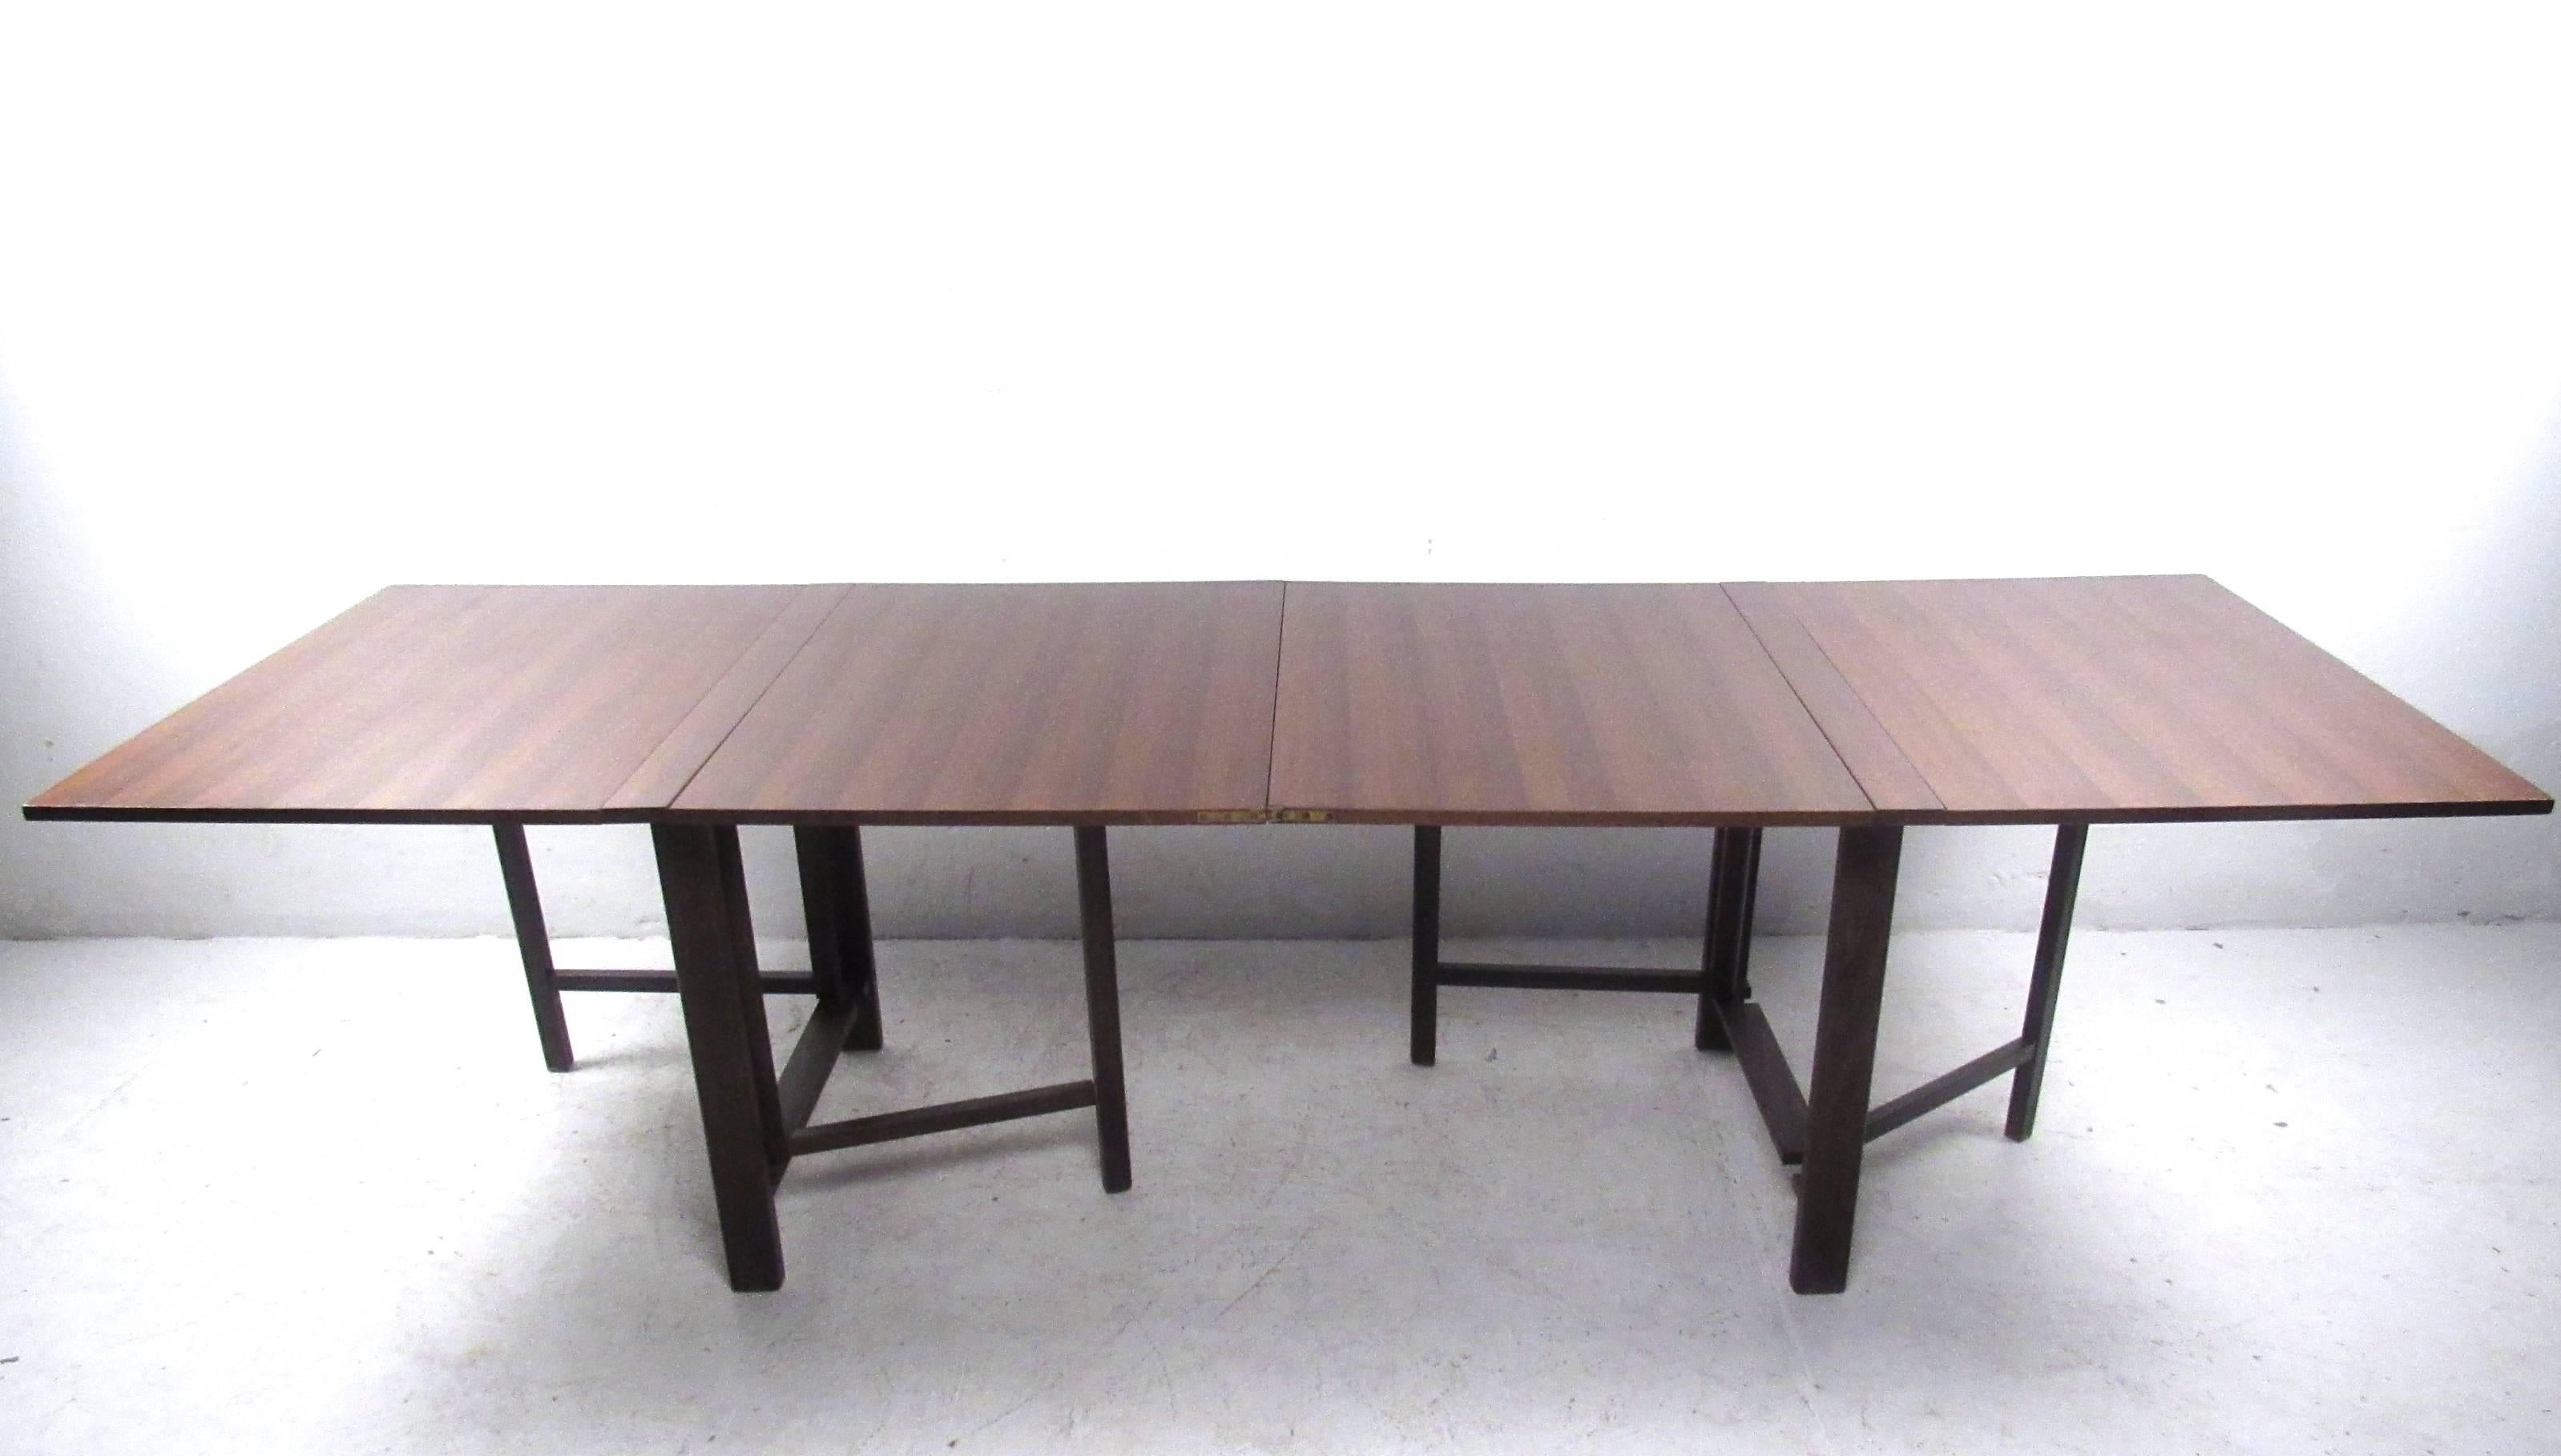 This unique vintage conference table makes a stylish and versatile addition to any interior. Expanding from 9.5 inches wide to 110 inches wide makes this perfect for large seating arrangements, while allowing it to be easily stored in its condensed